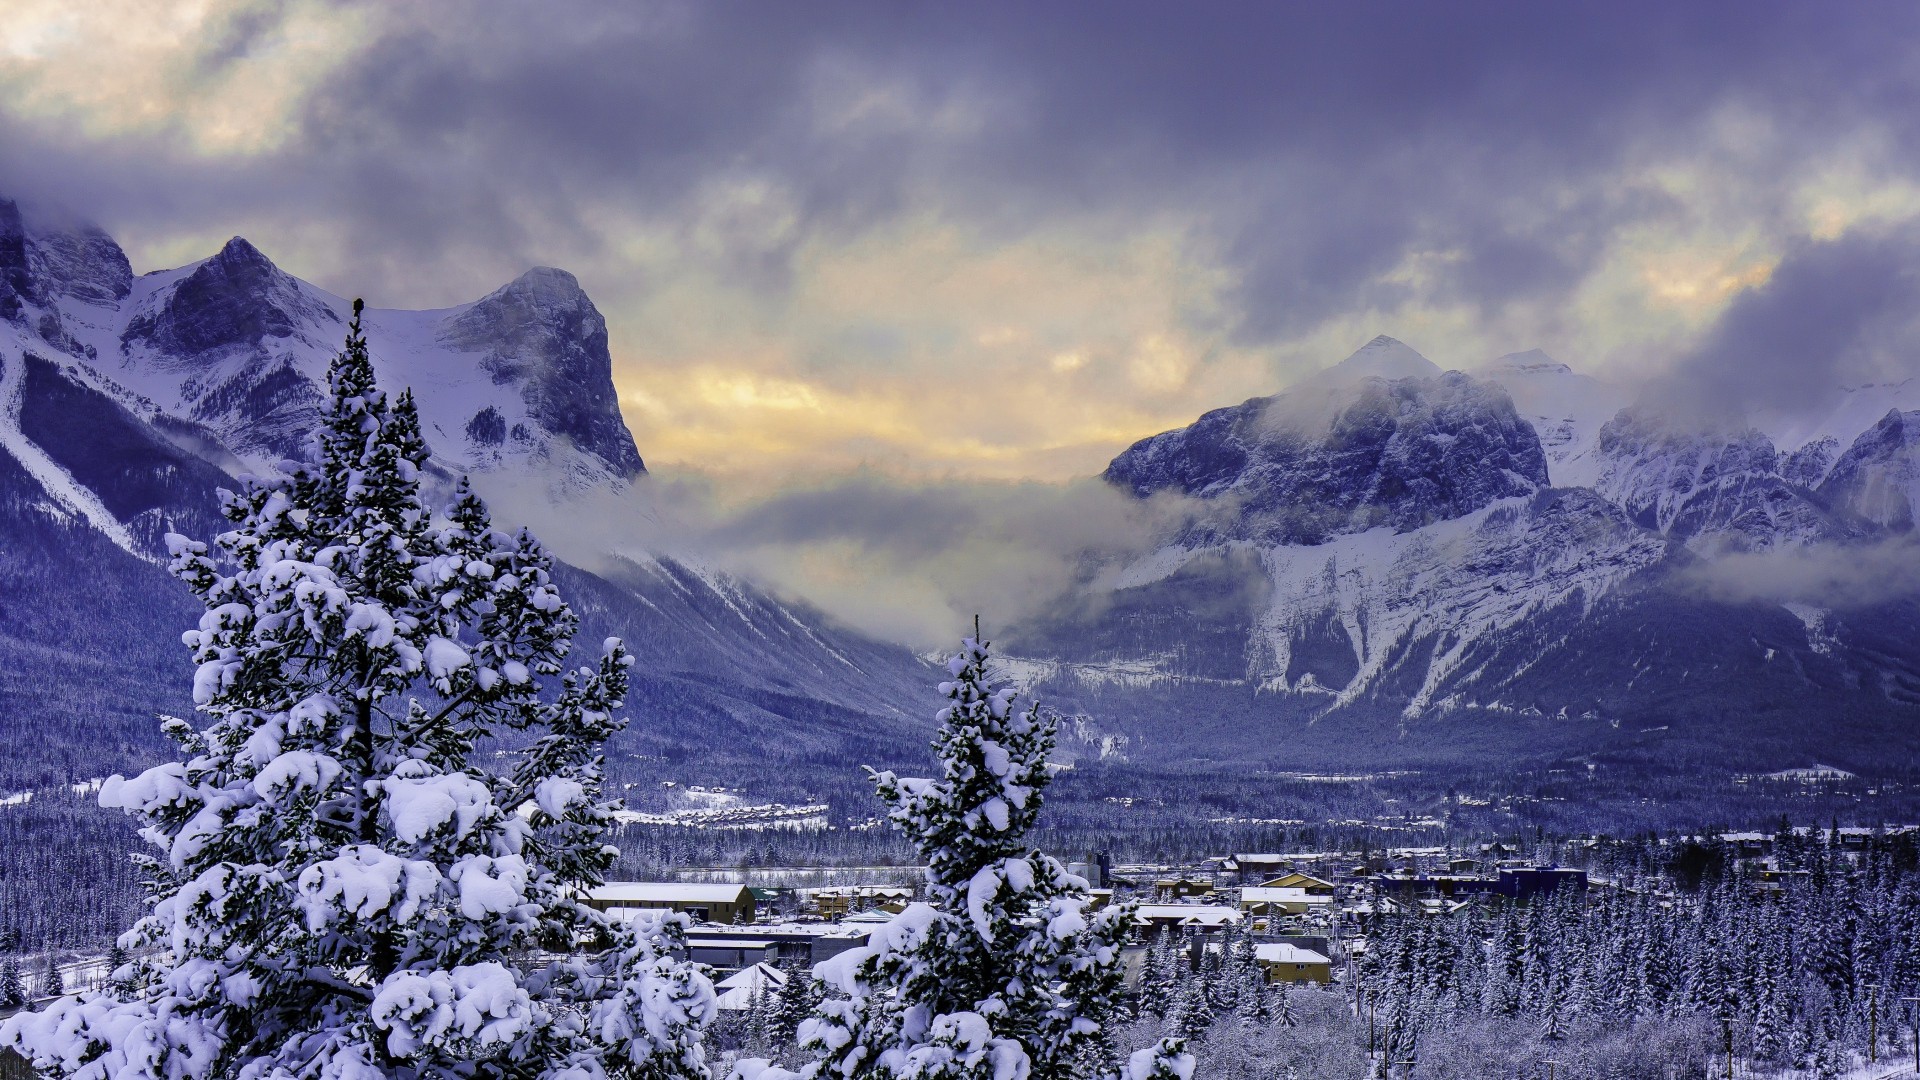 General 1920x1080 nature winter mountains clouds snow snowy peak snowy mountain ice cold outdoors landscape trees sky